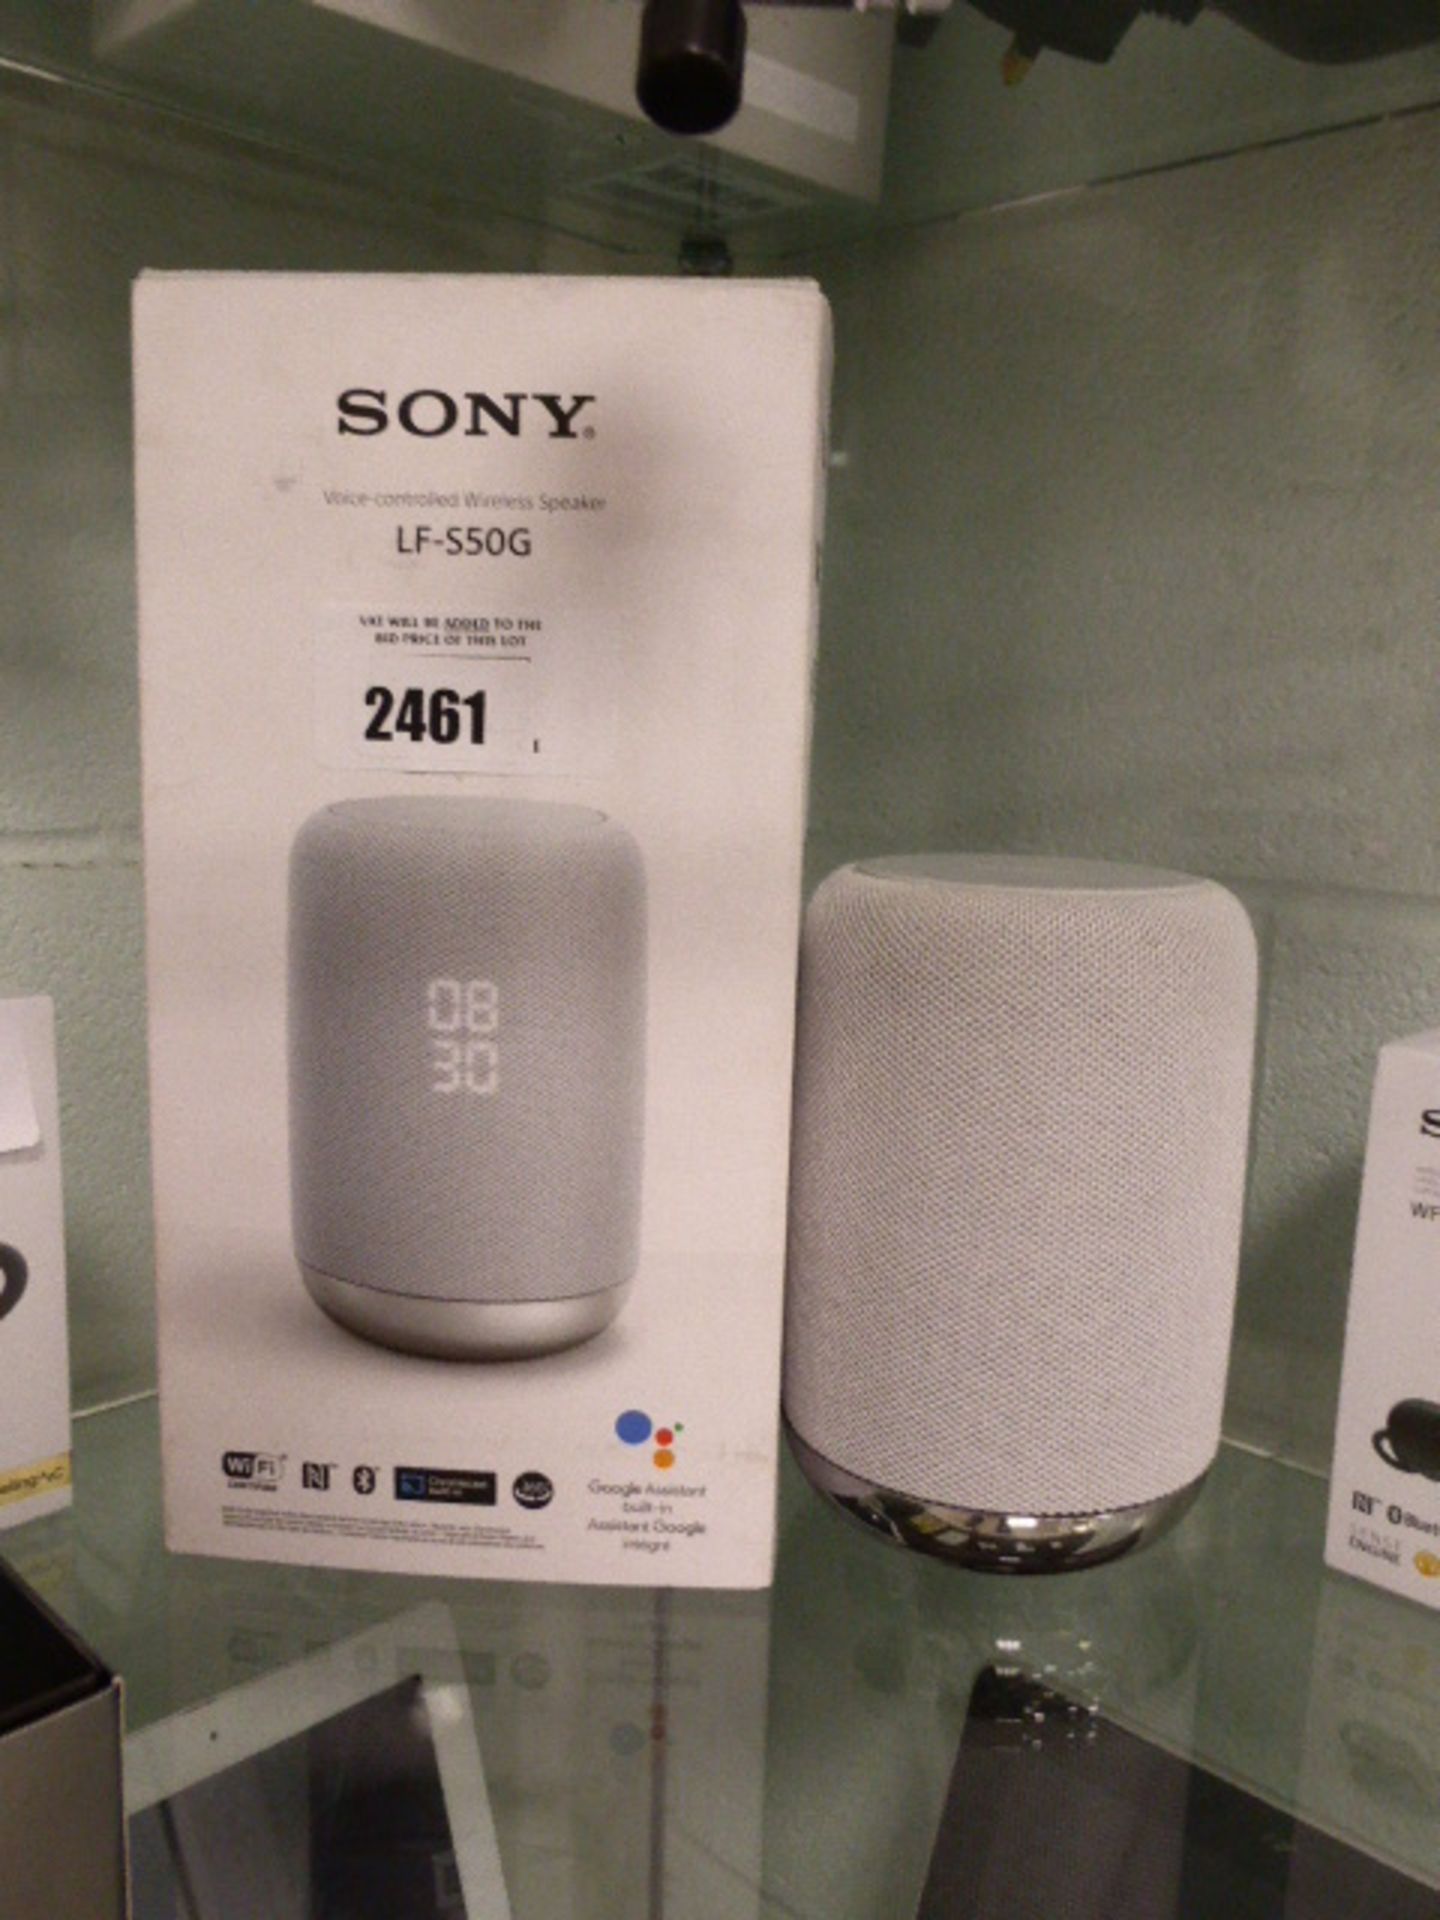 Sony LF-S50G voice-controlled wireless speaker with box